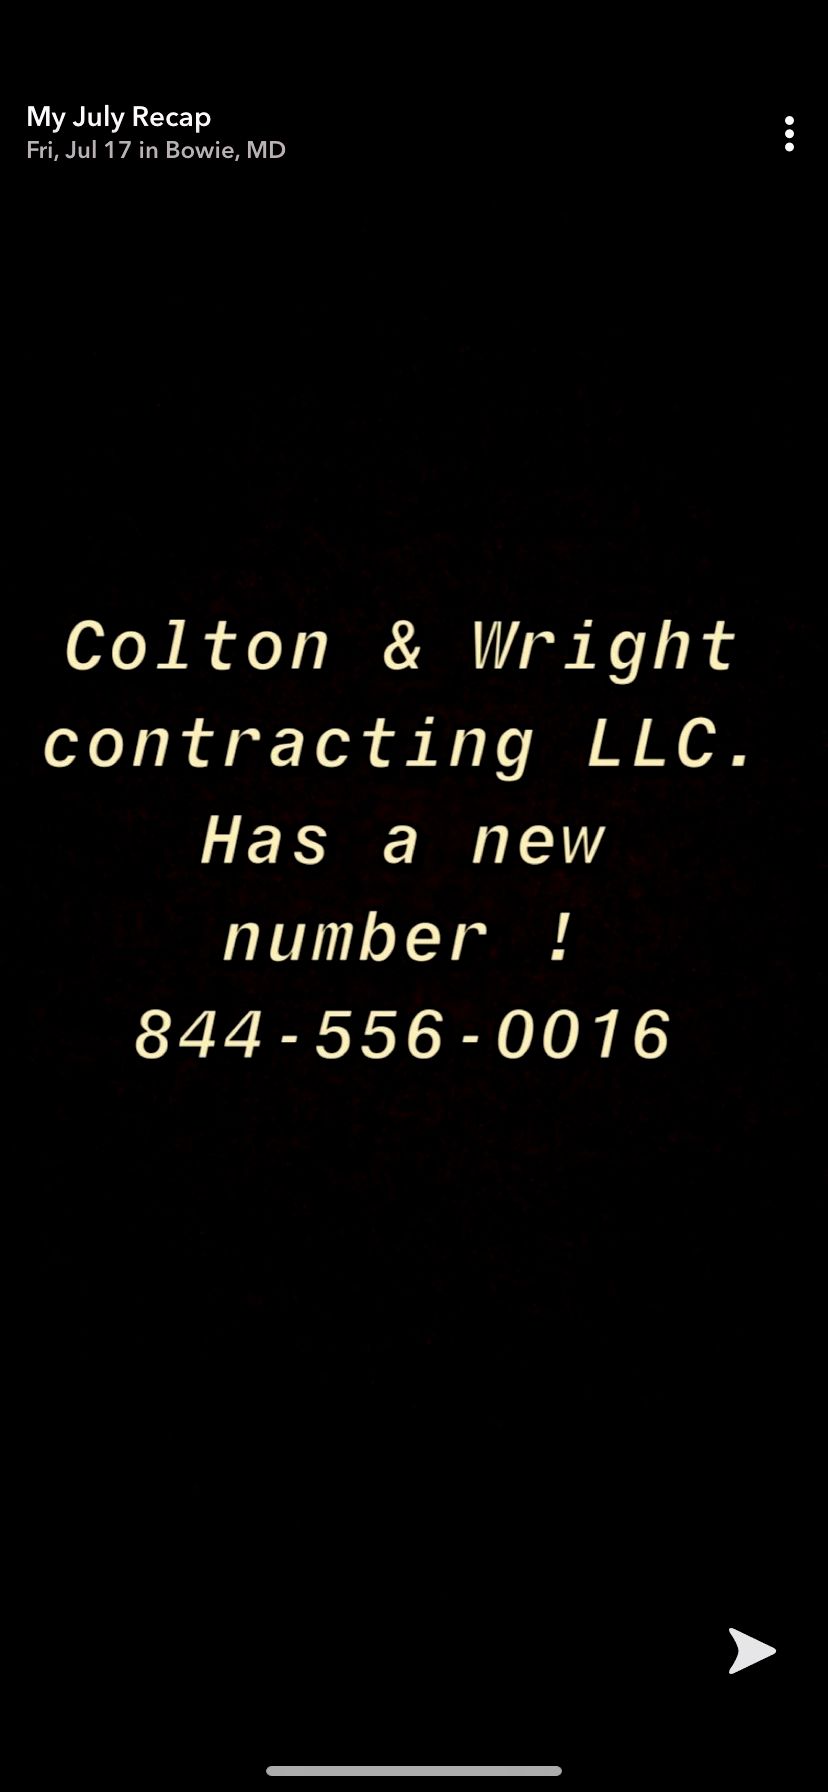 Colton & Wright Contracting LLC